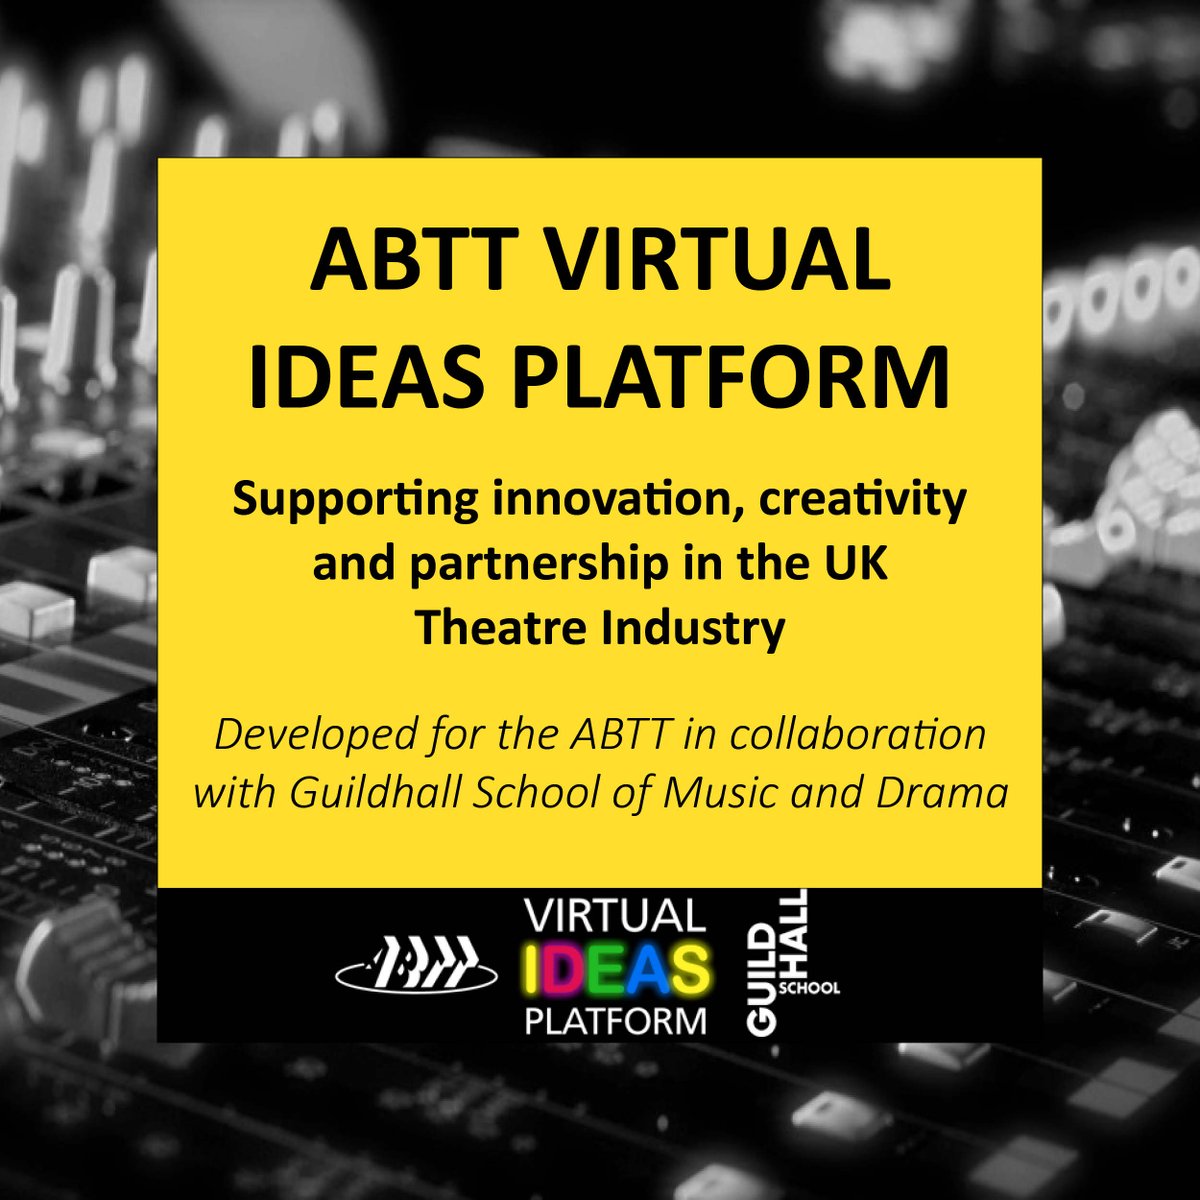 Supporting innovation, creativity and partnership in the UK Theatre Industry, the Virtual Ideas Platform is open to anyone and everyone with an idea. Do you have a great idea for the industry? Click here to find out more... abttvip.com #ABTT #TheABTT #ABTTvip